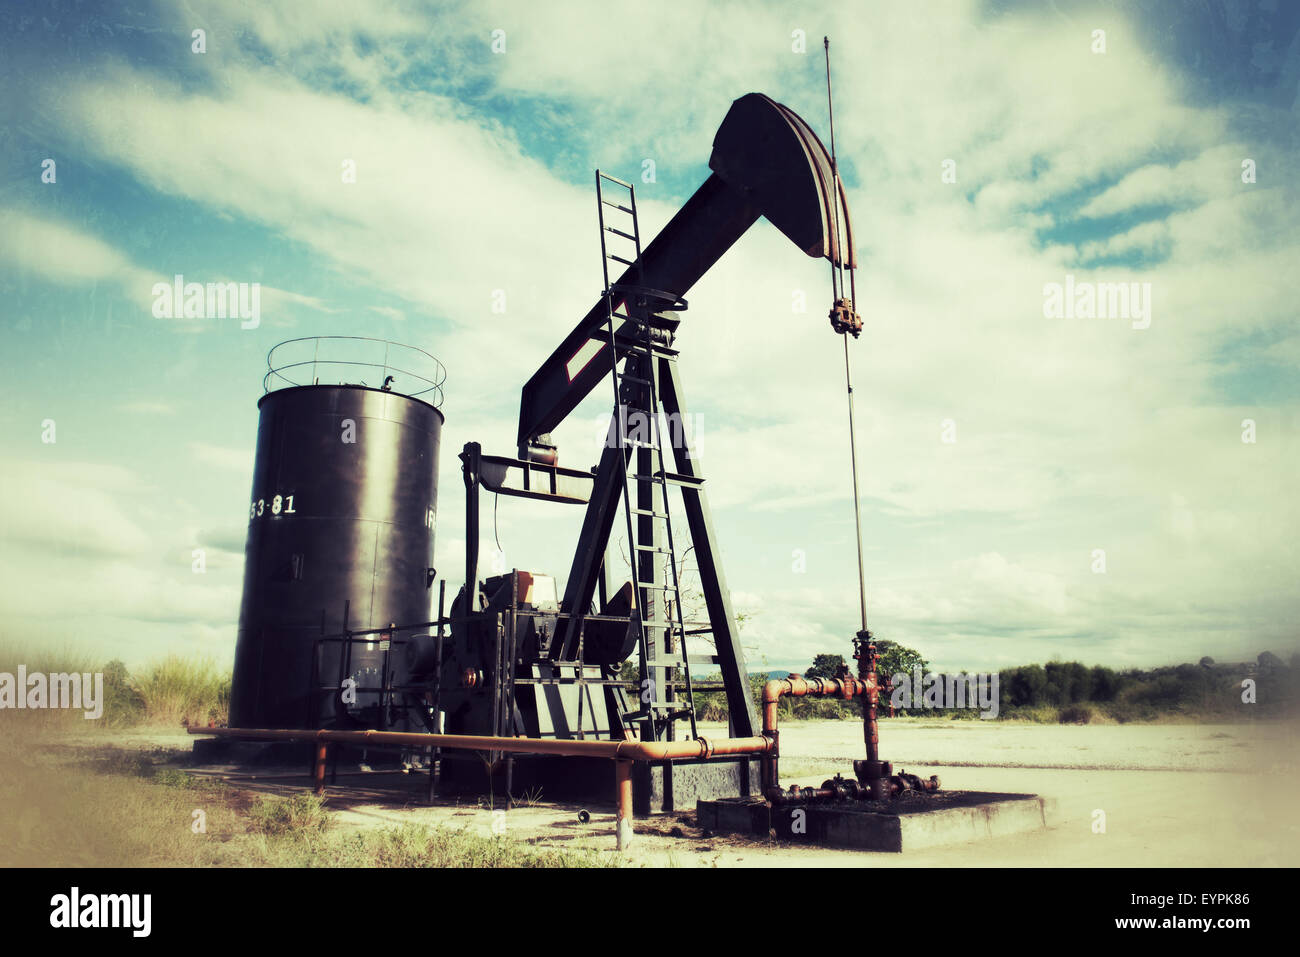 pumpjack pumping crude oil from oil well vintage style Stock Photo